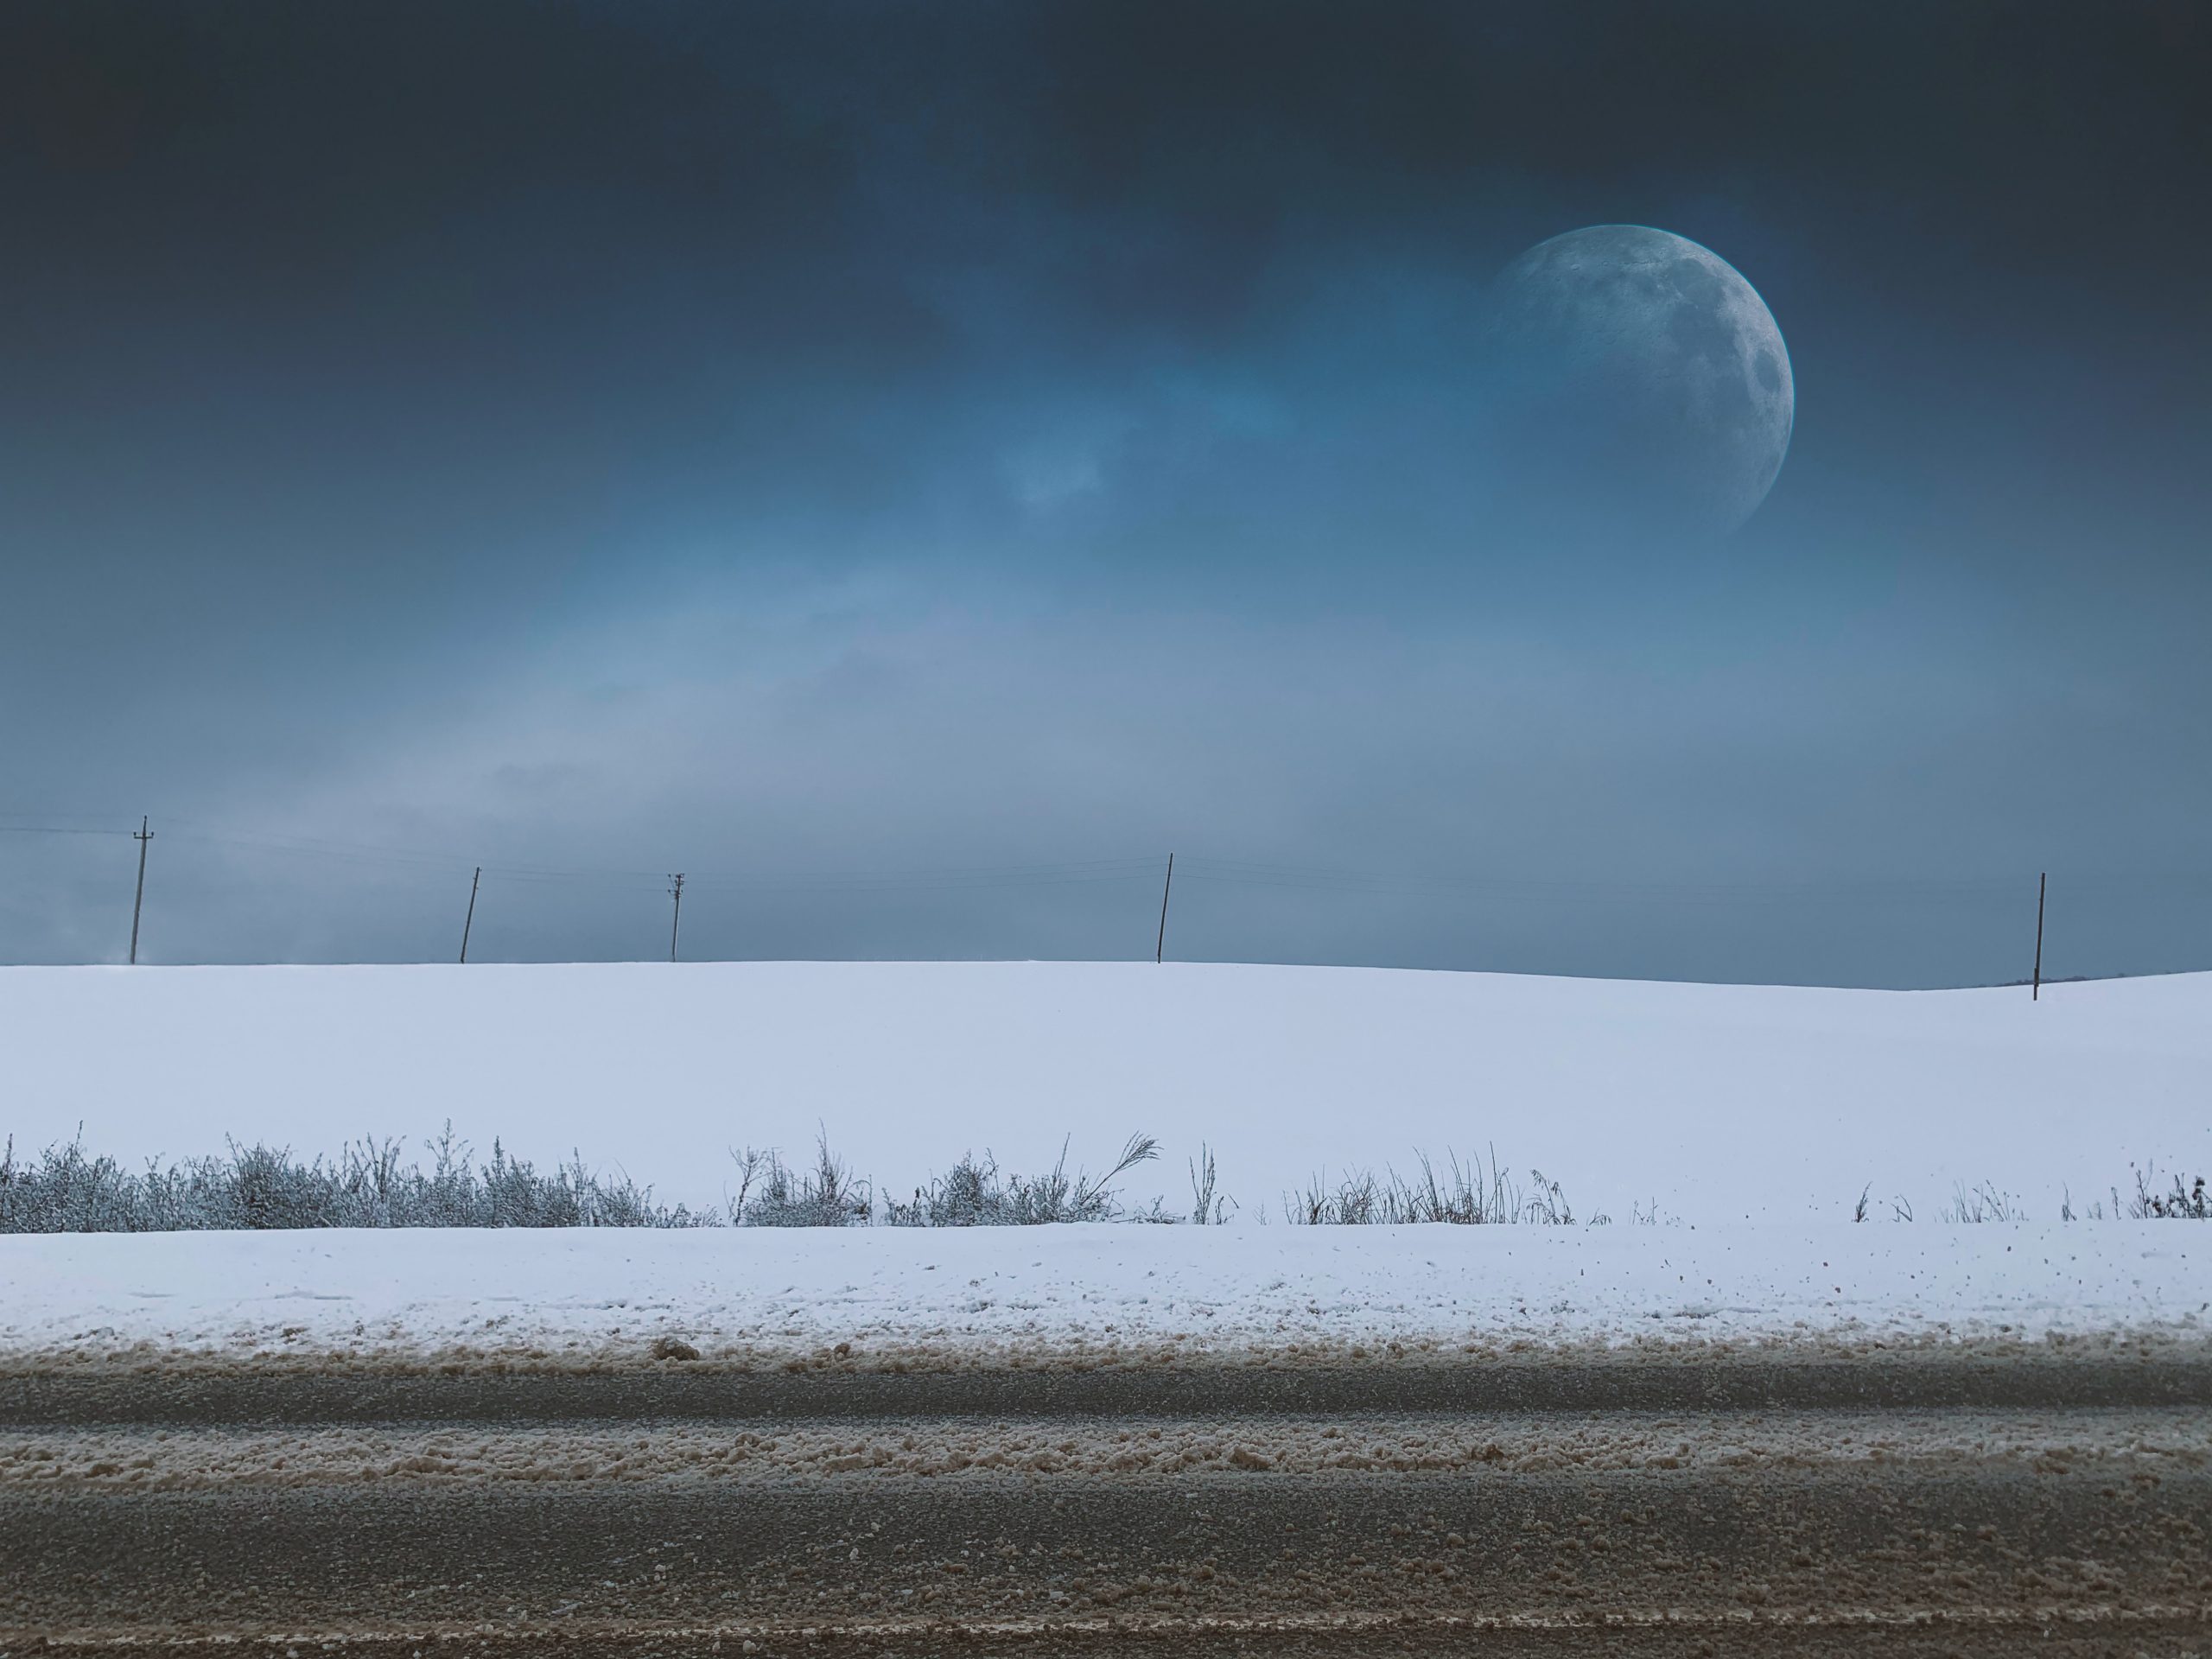 A photograph of a snow-covered field with tufts of grass peeking through. Above, the sky is a dark blue with smoky wisps of clouds. To the right, a full moon peers through the clouds.